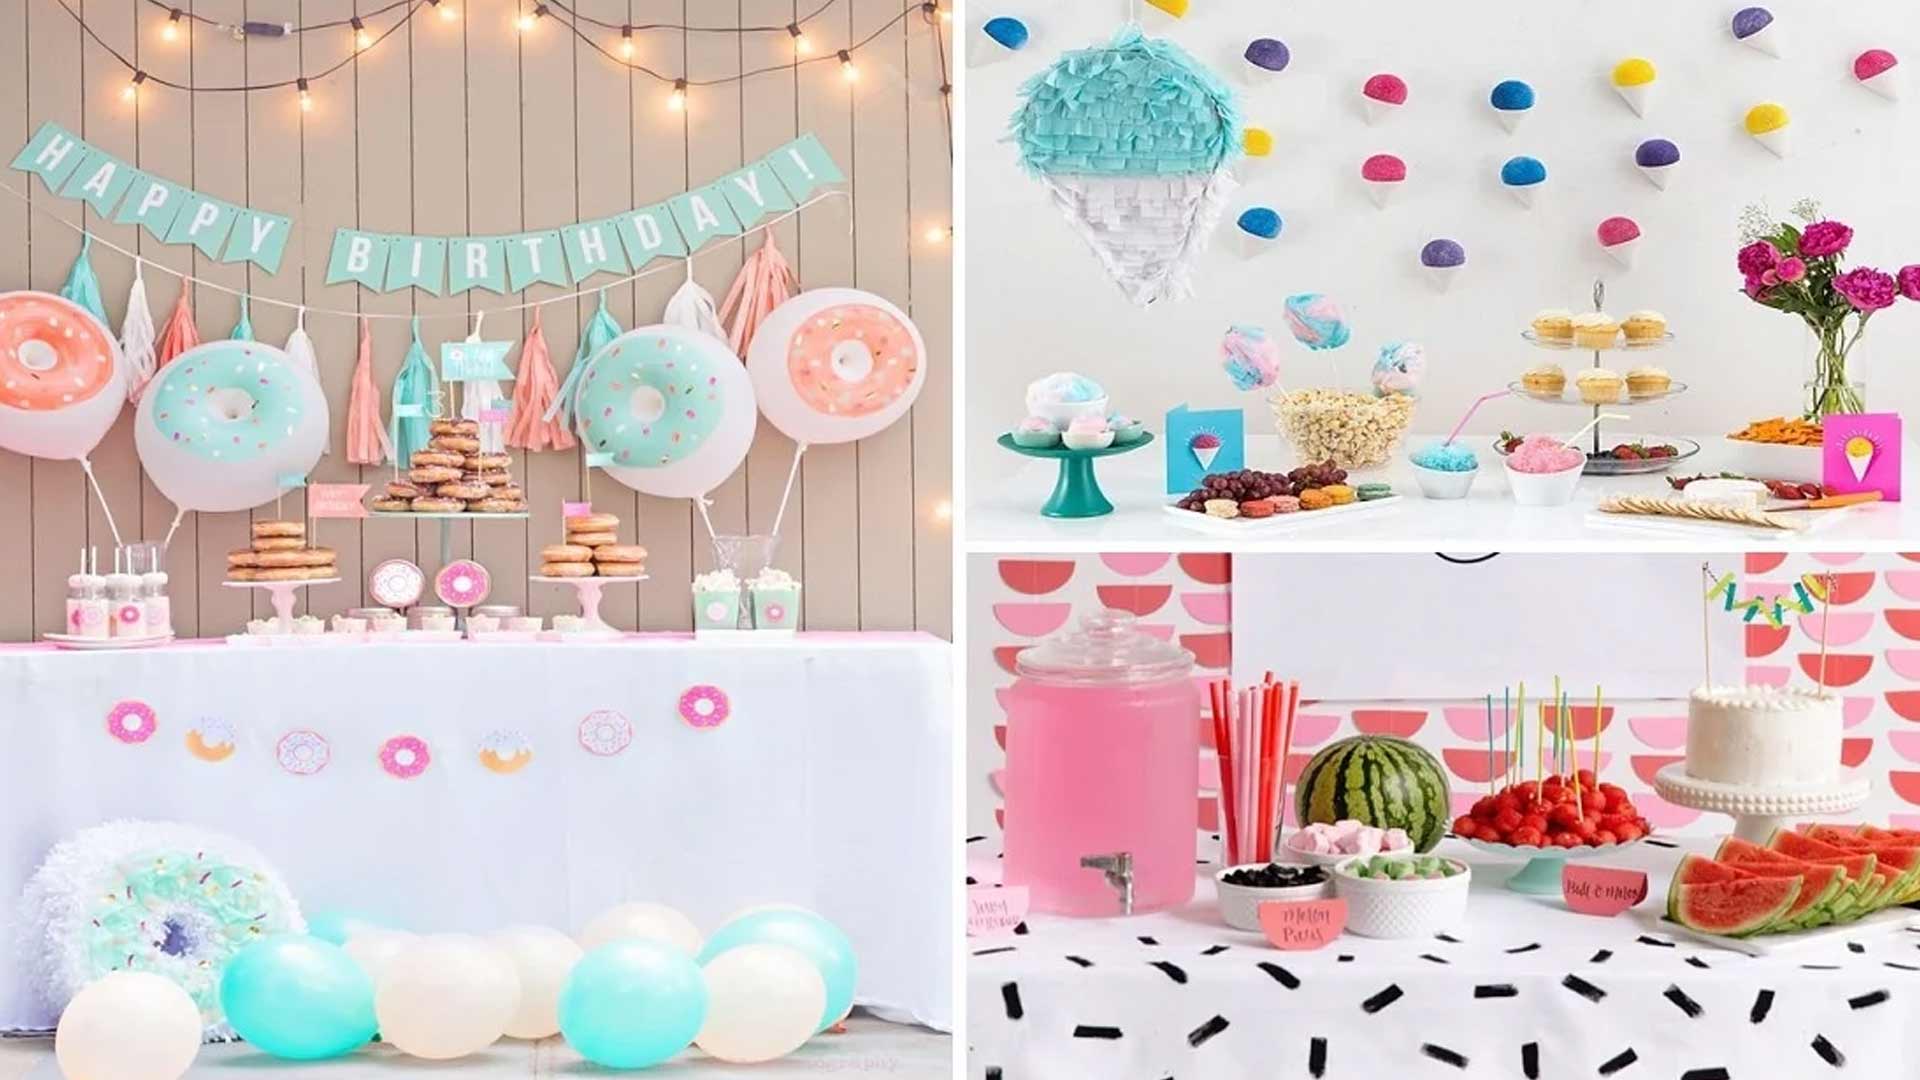 Make It Fun! Birthday Party Themes Are A Great Idea